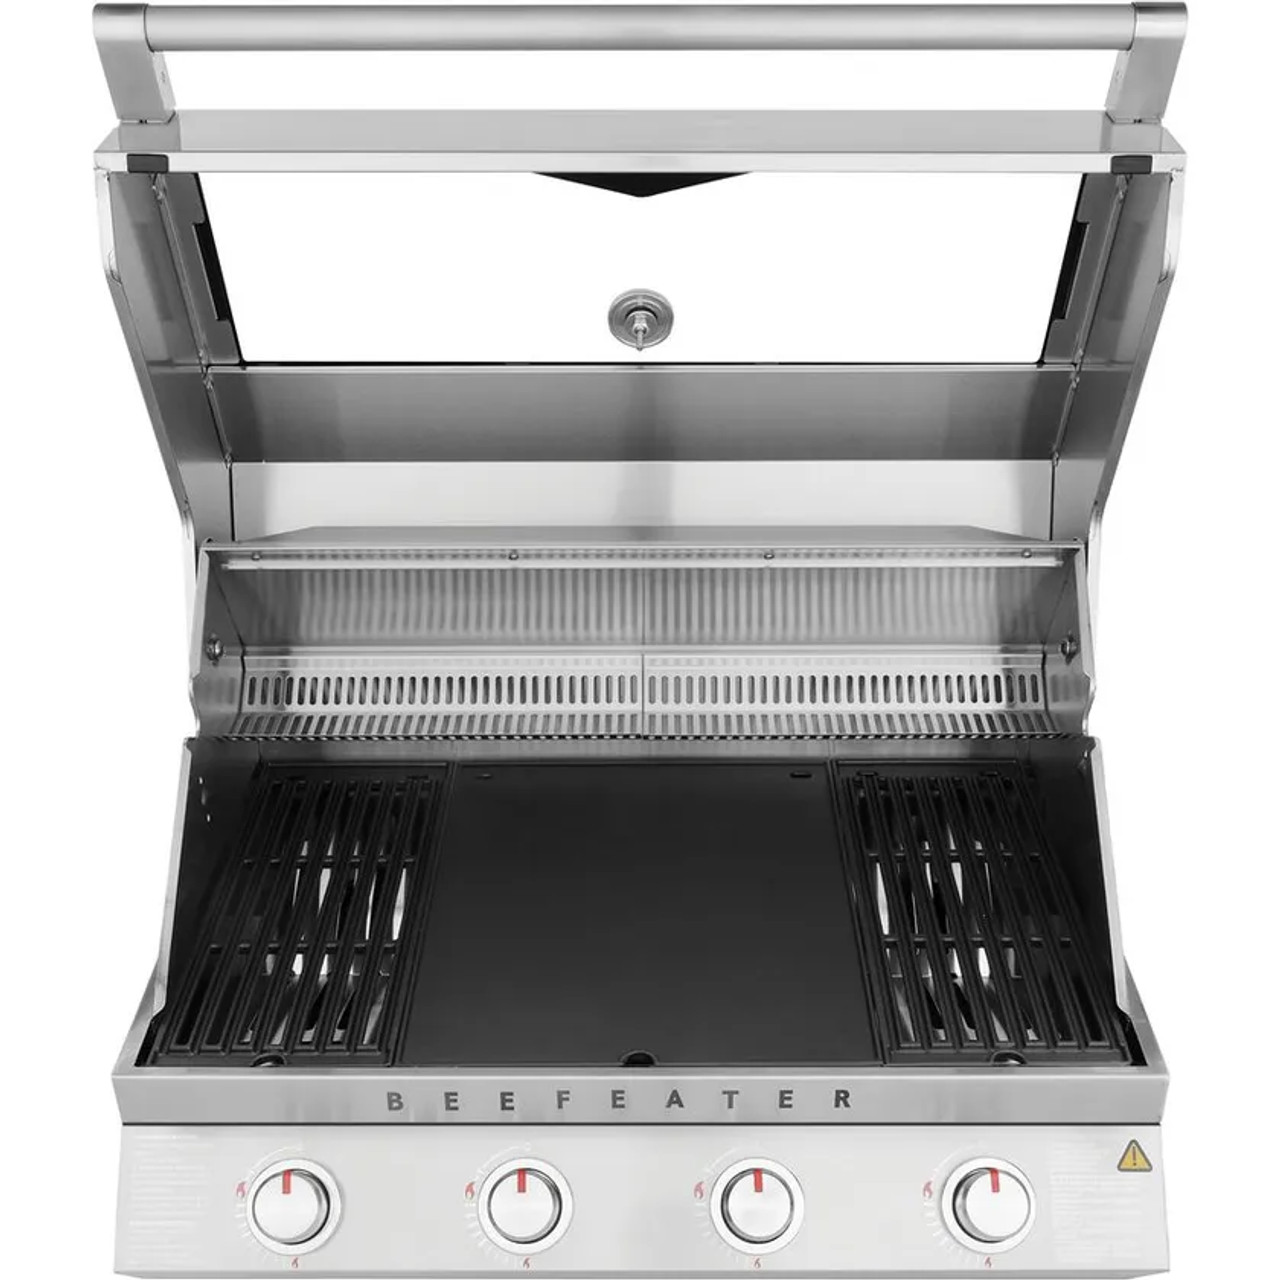 BBG7640SA - Beefeater 7000 Classic 81cm Built In BBQ With Window Hood - Stainless Steel